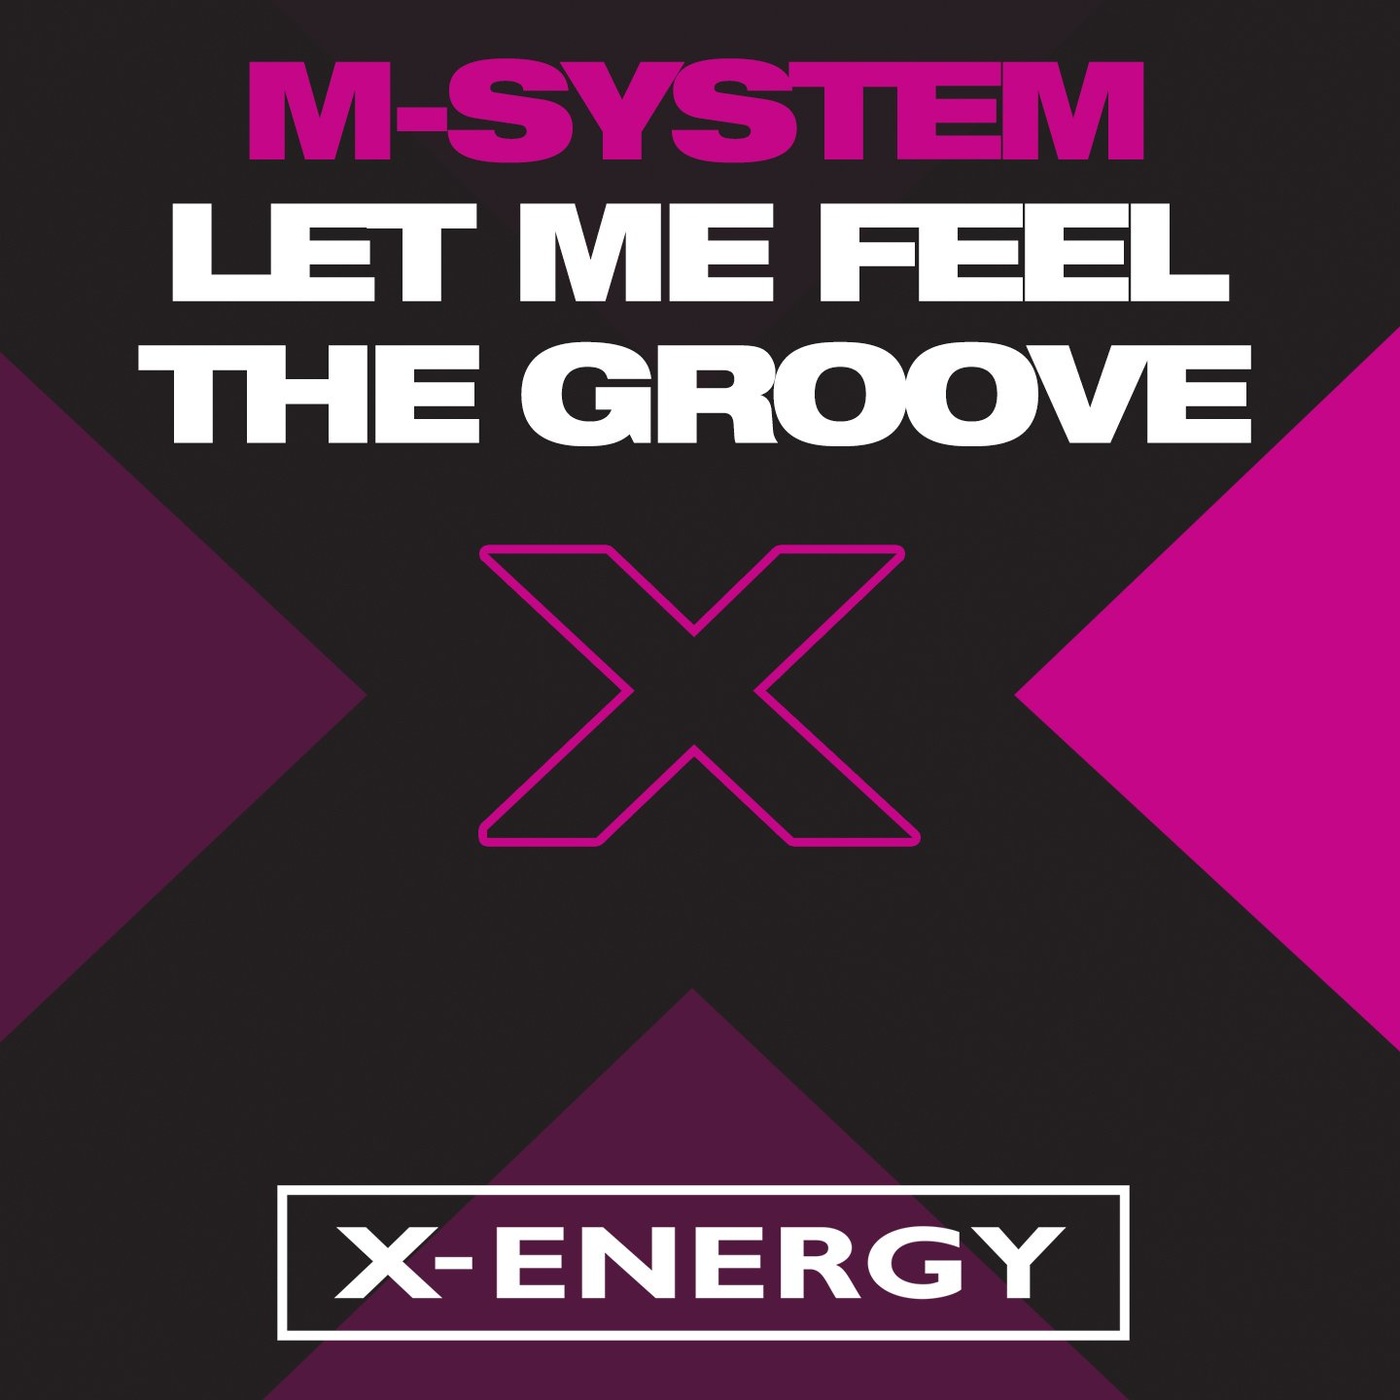 M-System - Let Me Feel the Groove (Web Single) (1996) FLAC